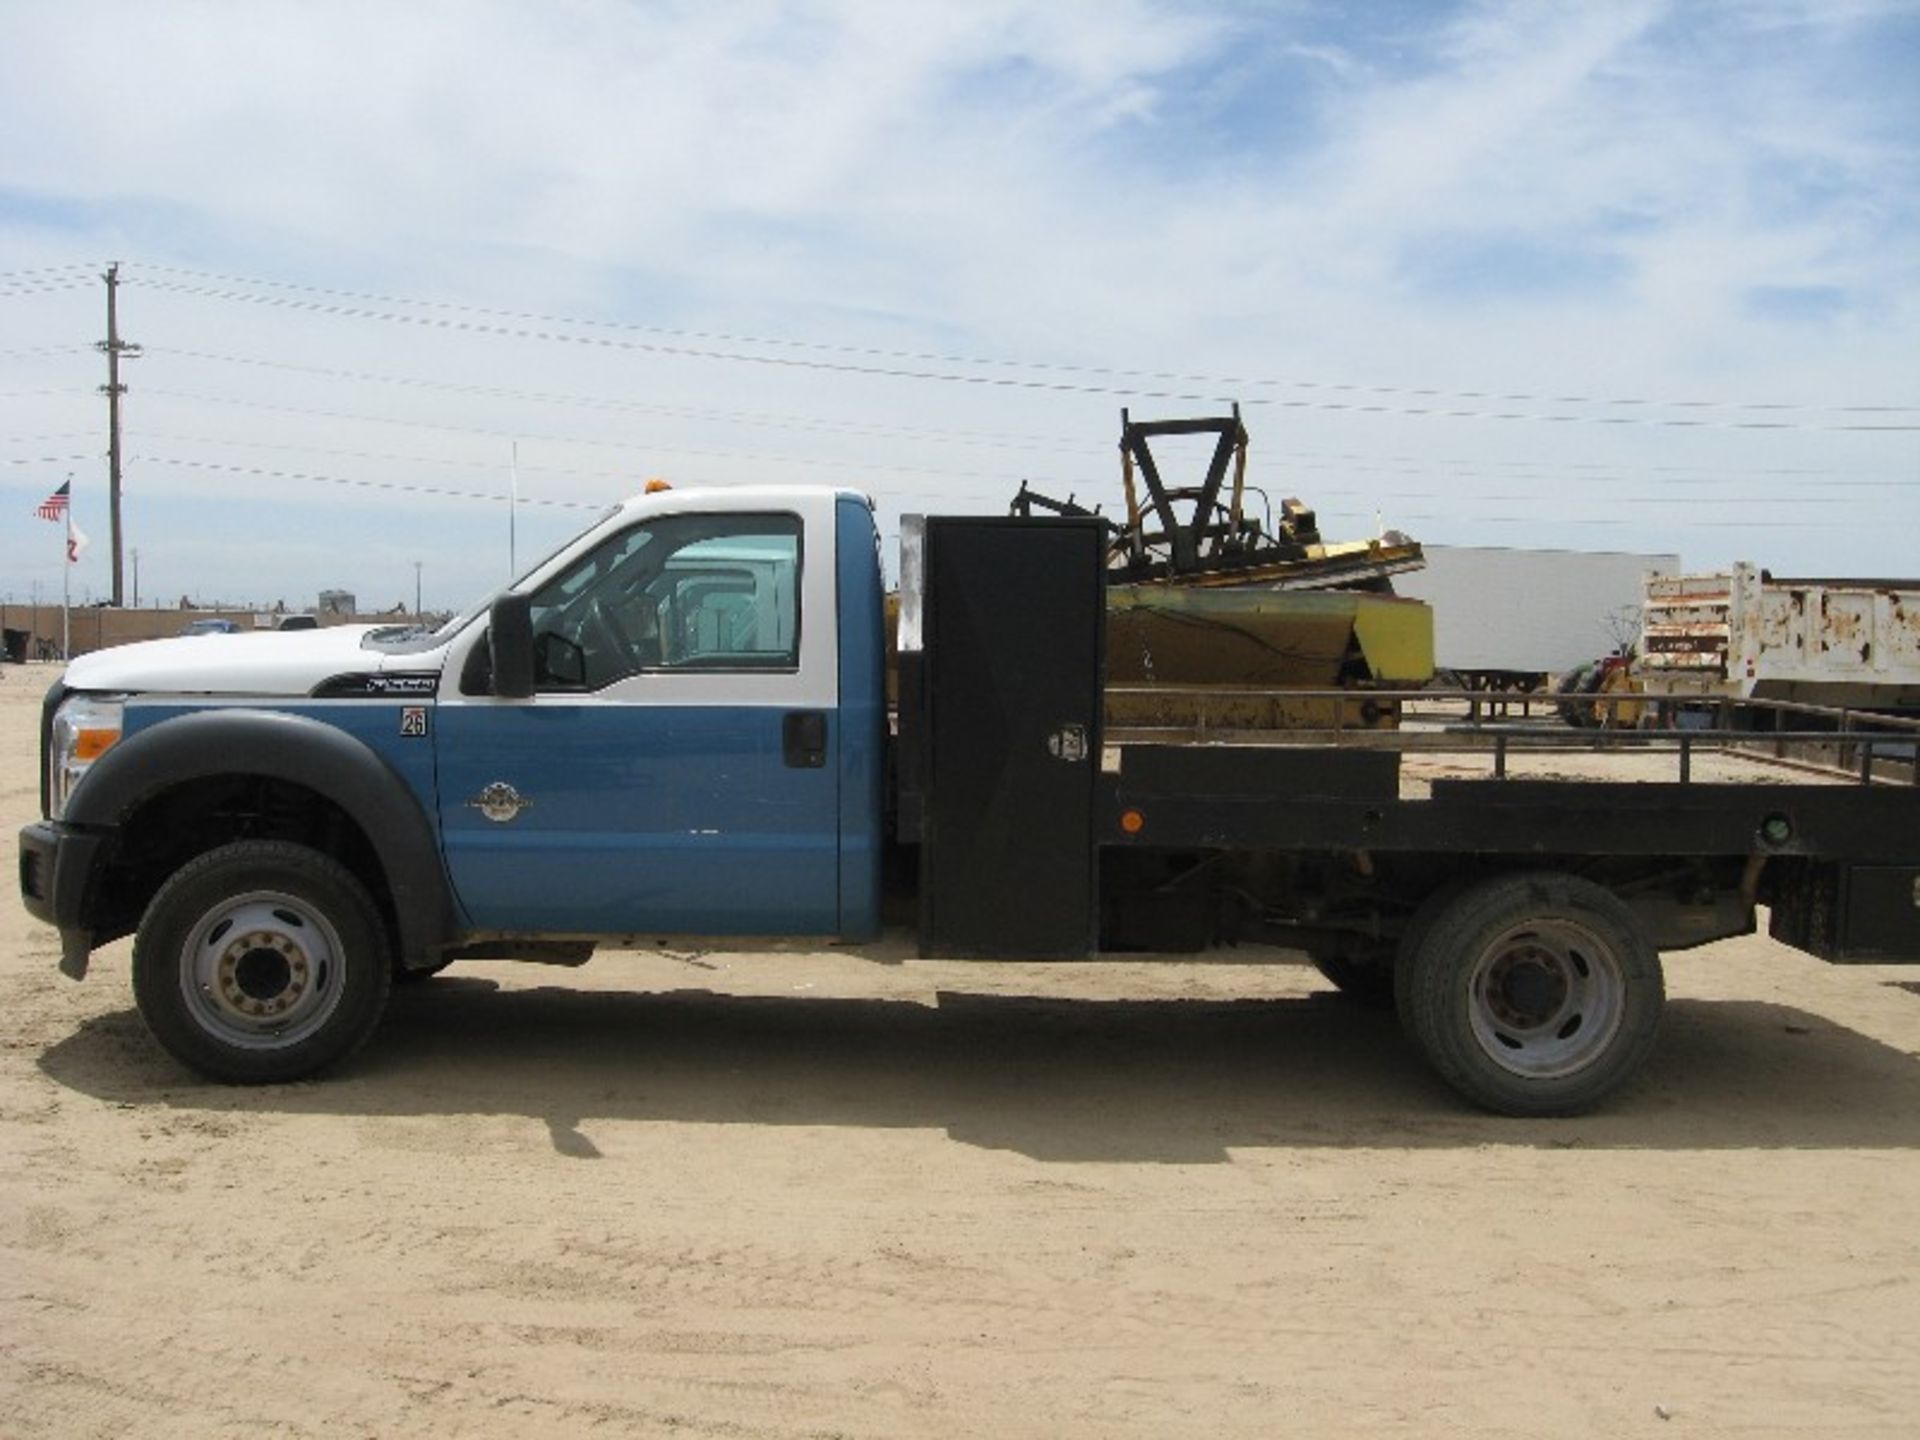 2012 Ford F550 - Image 2 of 4